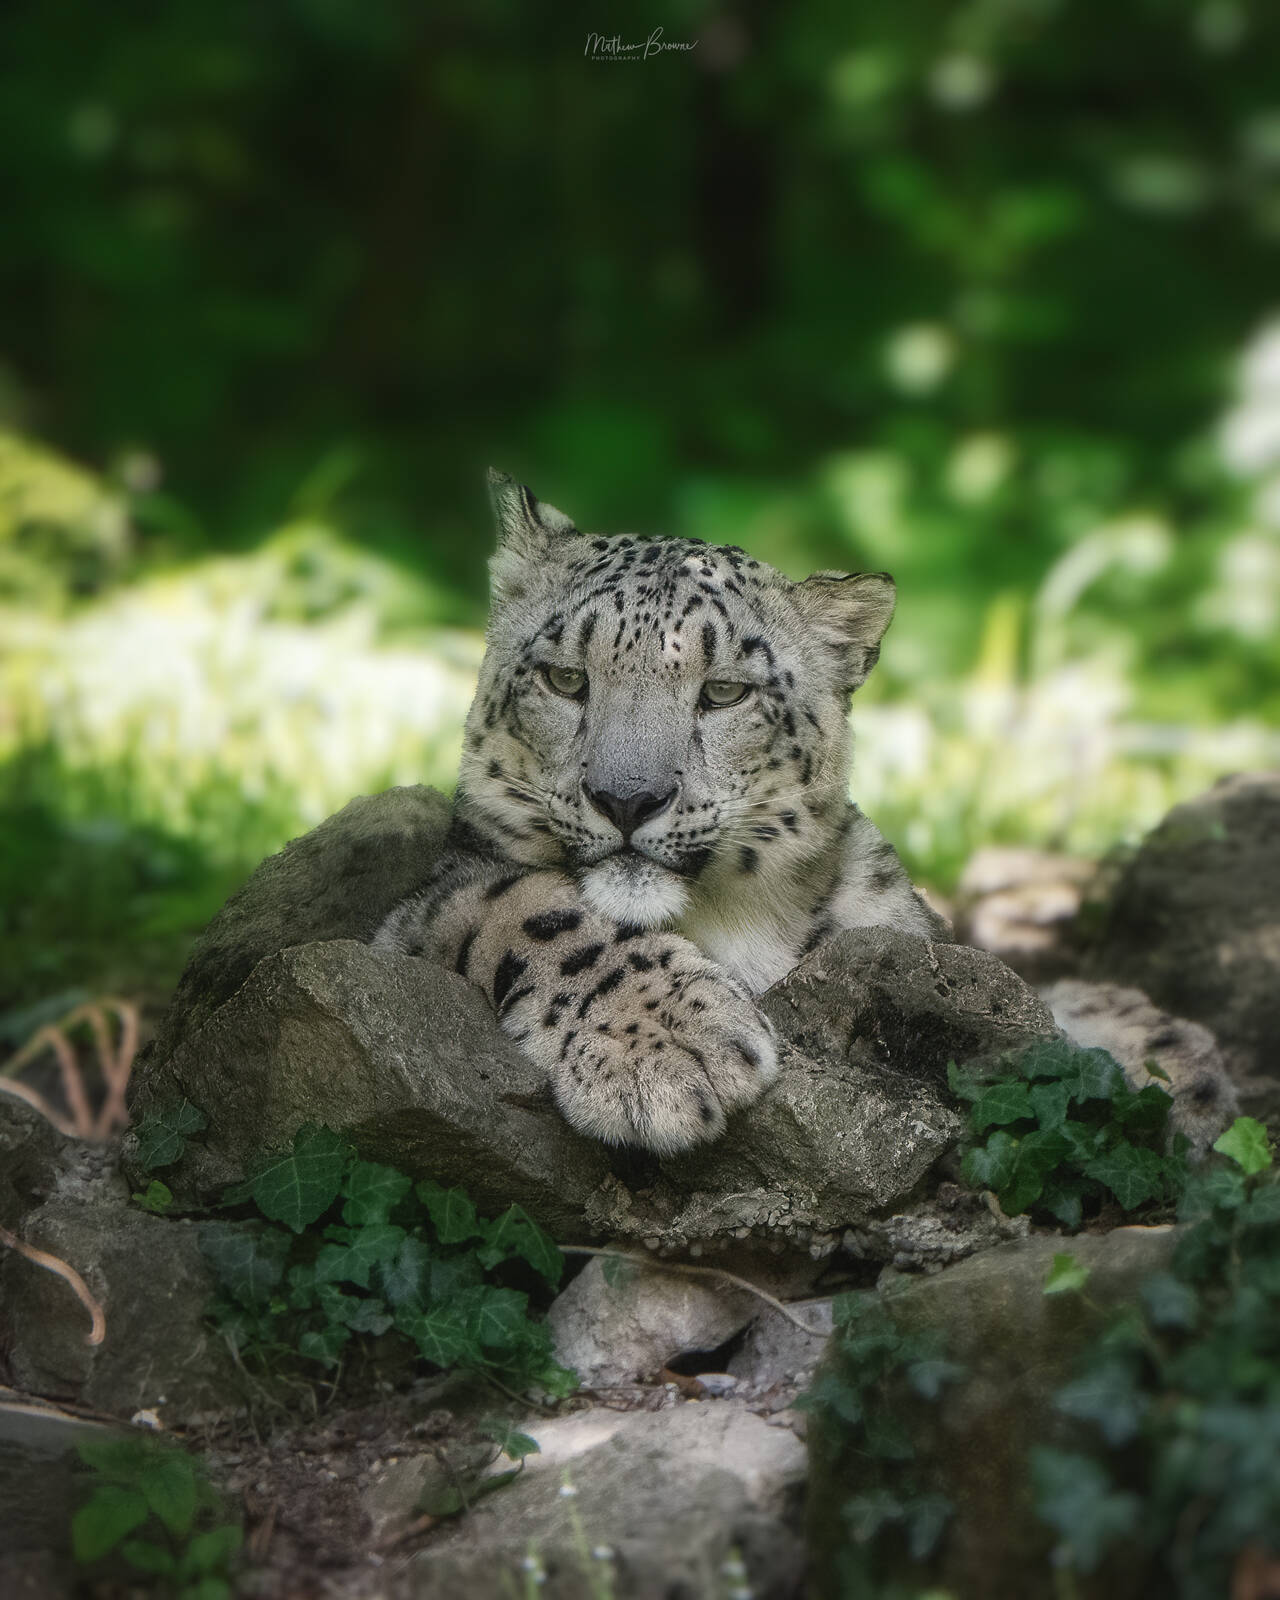 Image of Zoo Zurich by Mathew Browne